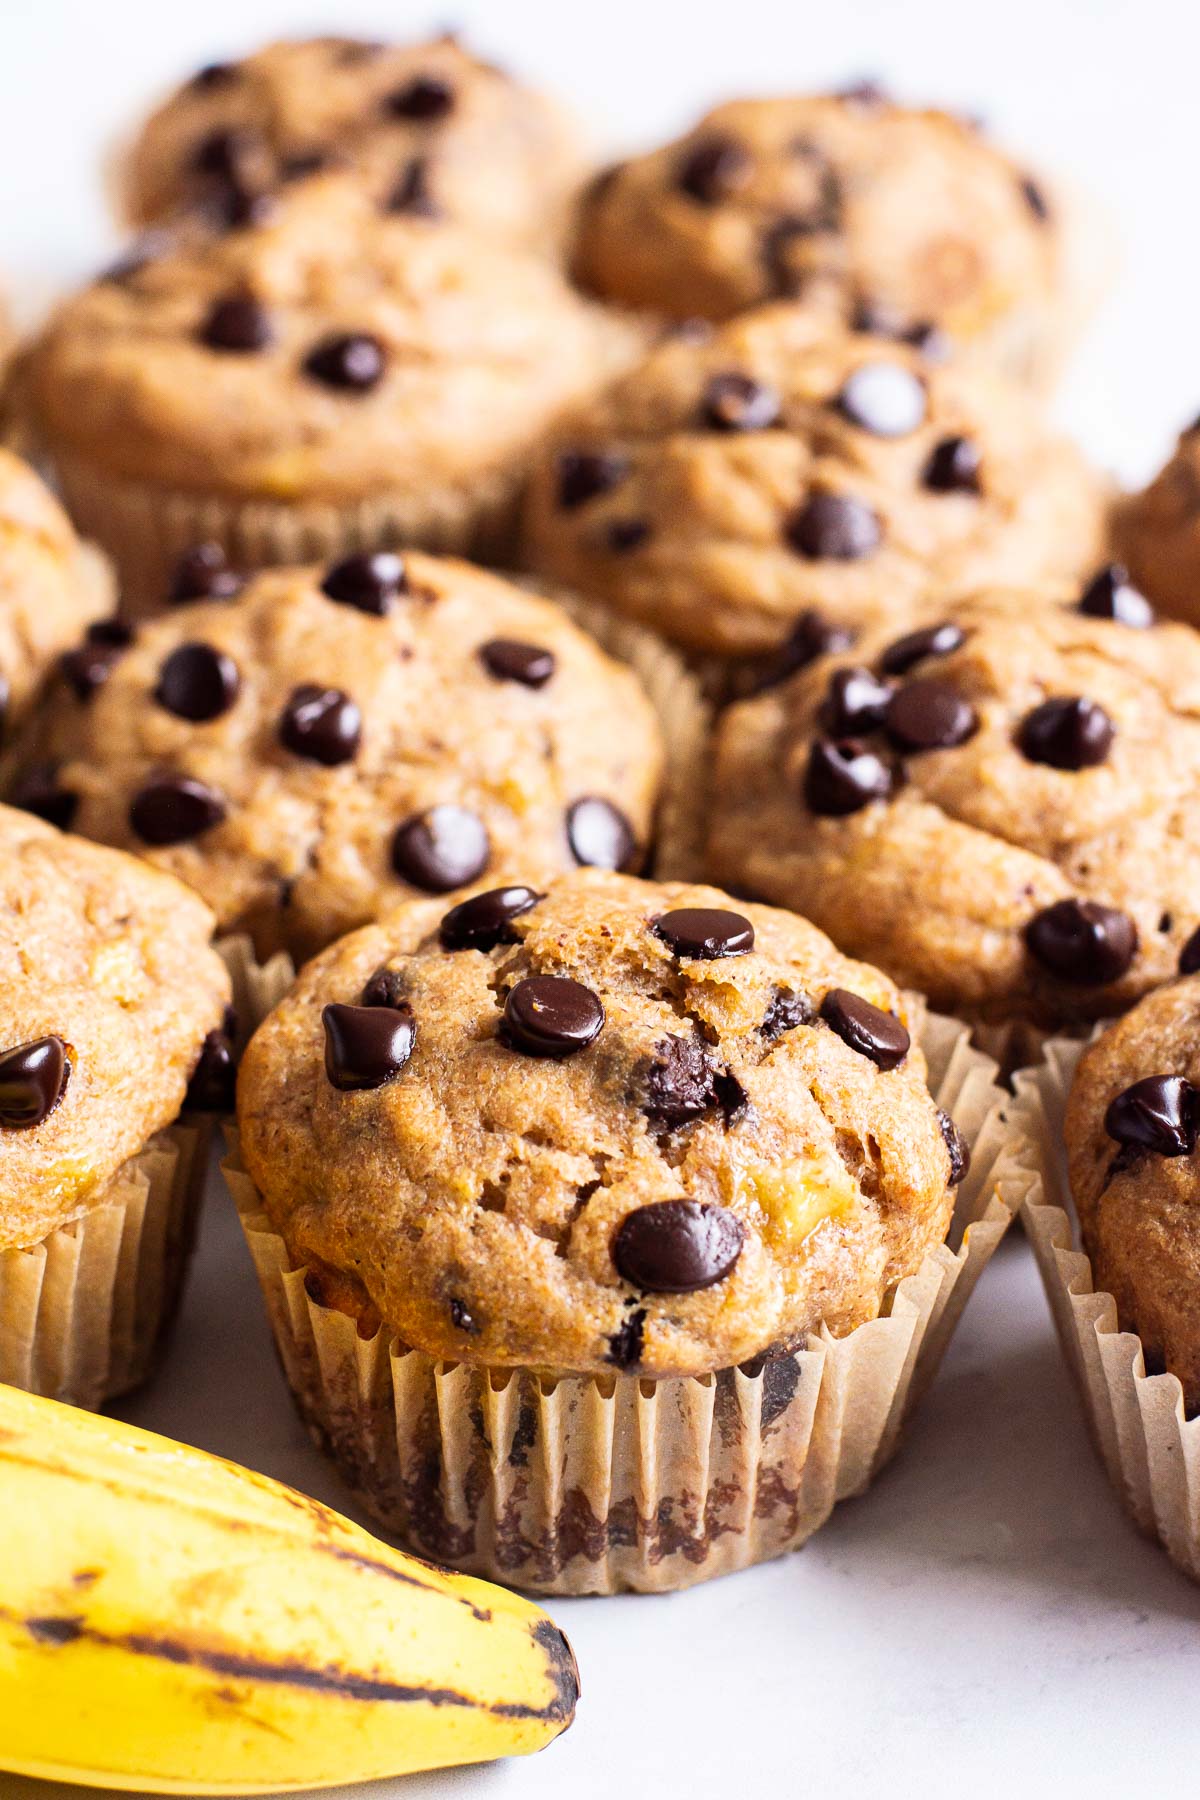 Healthy Banana Chocolate Chip Muffins" />
	
	
	
	
	
	
	
	
	
	
	
	
	
	
	{"@context":"https://schema.org","@graph":[{"@type":"Organization","@id":"https://ifoodreal.com/#organization","name":"iFoodreal","url":"https://ifoodreal.com/","sameAs":["https://www.facebook.com/iFOODreal/","https://www.instagram.com/ifoodreal/","https://www.pinterest.com/ifoodreal/","https://twitter.com/ifoodreal"],"logo":{"@type":"ImageObject","@id":"https://ifoodreal.com/#logo","inLanguage":"en-US","url":"https://ifoodreal.com/wp-content/uploads/2017/11/ifrLogo-1.png","contentUrl":"https://ifoodreal.com/wp-content/uploads/2017/11/ifrLogo-1.png","width":150,"height":37,"caption":"iFoodreal"},"image":{"@id":"https://ifoodreal.com/#logo"}},{"@type":"WebSite","@id":"https://ifoodreal.com/#website","url":"https://ifoodreal.com/","name":"iFOODreal.com","description":"","publisher":{"@id":"https://ifoodreal.com/#organization"},"potentialAction":[{"@type":"SearchAction","target":{"@type":"EntryPoint","urlTemplate":"https://ifoodreal.com/?s={search_term_string}"},"query-input":"required name=search_term_string"}],"inLanguage":"en-US"},{"@type":"ImageObject","@id":"https://ifoodreal.com/healthy-banana-chocolate-chip-muffins/#primaryimage","inLanguage":"en-US","url":"https://ifoodreal.com/wp-content/uploads/2022/02/fg-healthy-banana-chocolate-chip-muffins.jpg","contentUrl":"https://ifoodreal.com/wp-content/uploads/2022/02/fg-healthy-banana-chocolate-chip-muffins.jpg","width":1250,"height":1250,"caption":"healthy banana chocolate chip muffins"},{"@type":["WebPage","FAQPage"],"@id":"https://ifoodreal.com/healthy-banana-chocolate-chip-muffins/#webpage","url":"https://ifoodreal.com/healthy-banana-chocolate-chip-muffins/","name":"Healthy Banana Chocolate Chip Muffins